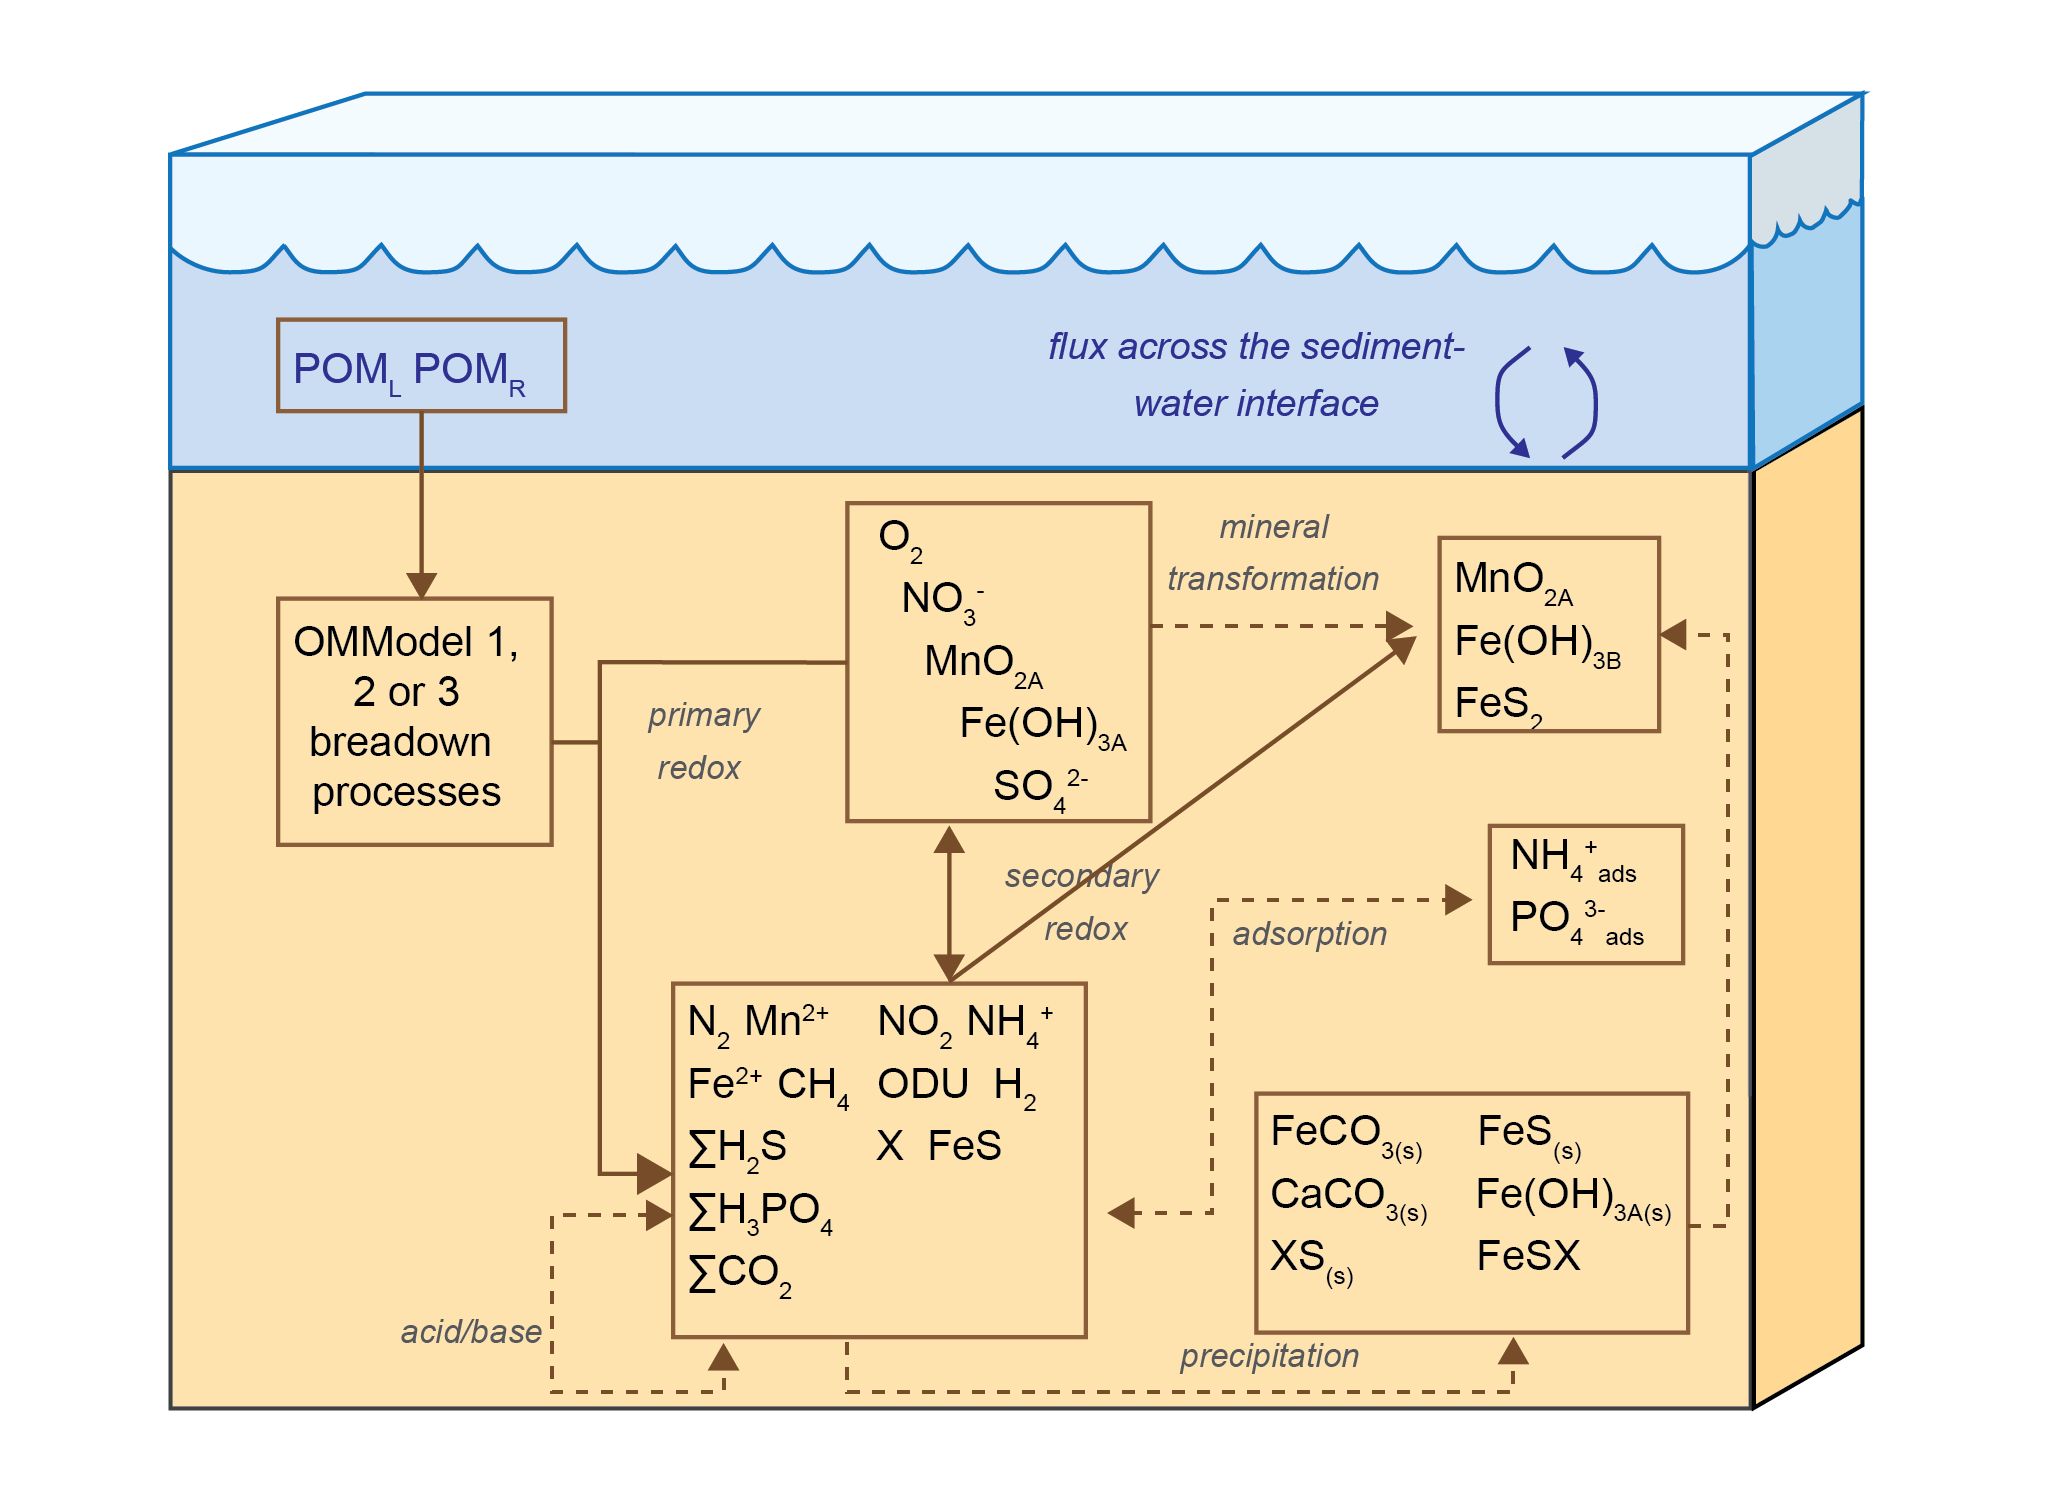 Overview of the chemical processes in CANDI-AED: organic matter transformation and oxidation, and reduction/oxidation, crystallisation, adsorption and precipitation reactions of inorganic by-products. Most of the processes are triggered by the input of POM at the sediment-water interface.